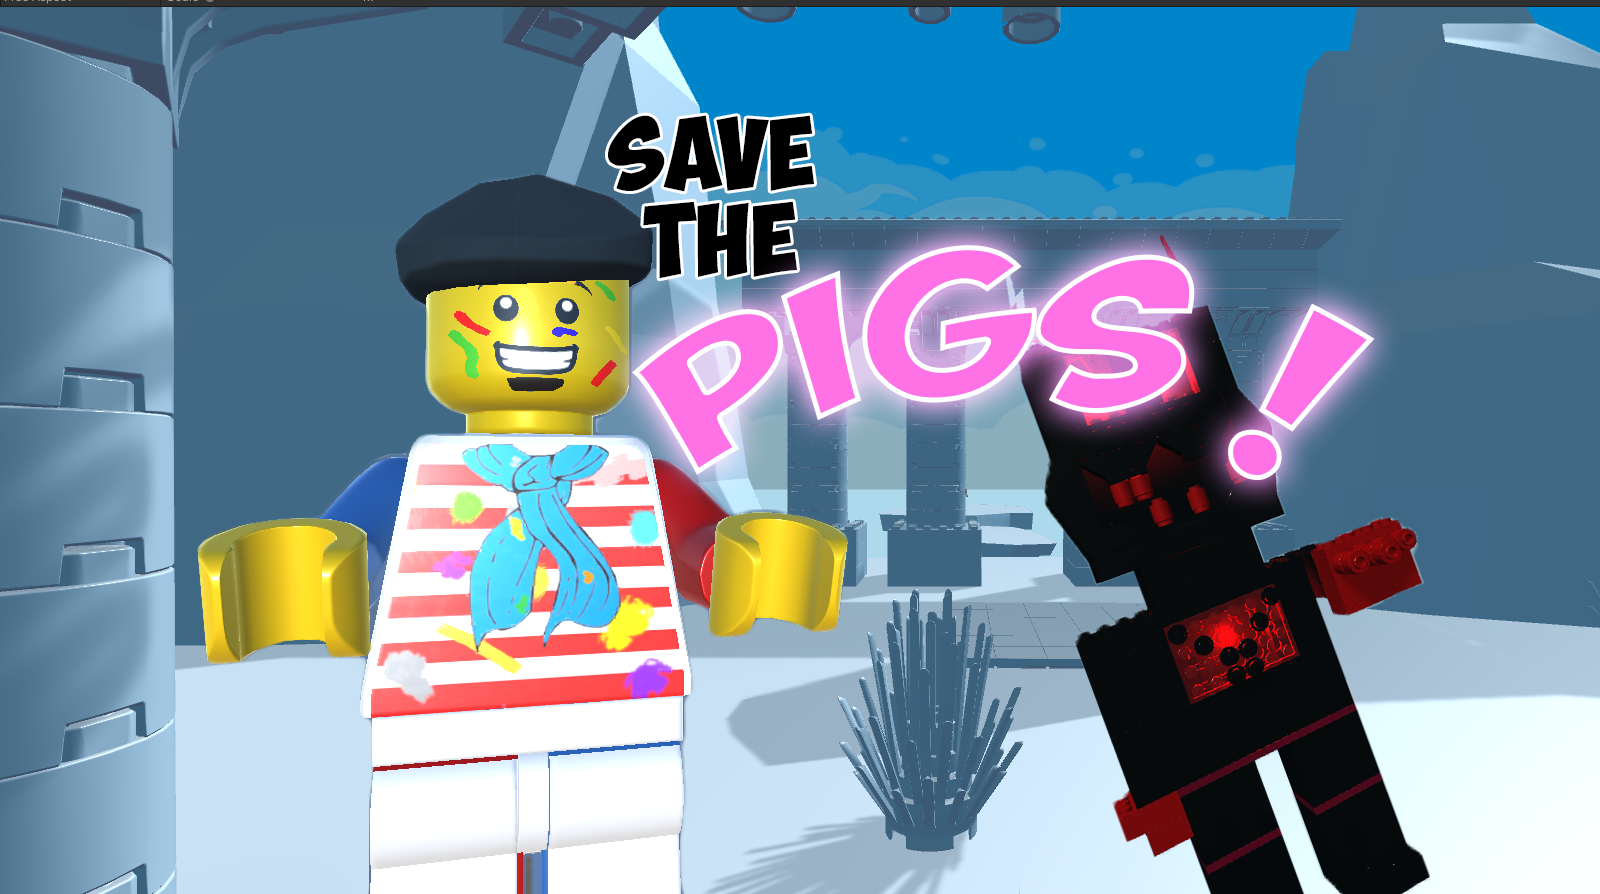 Save the pigs !